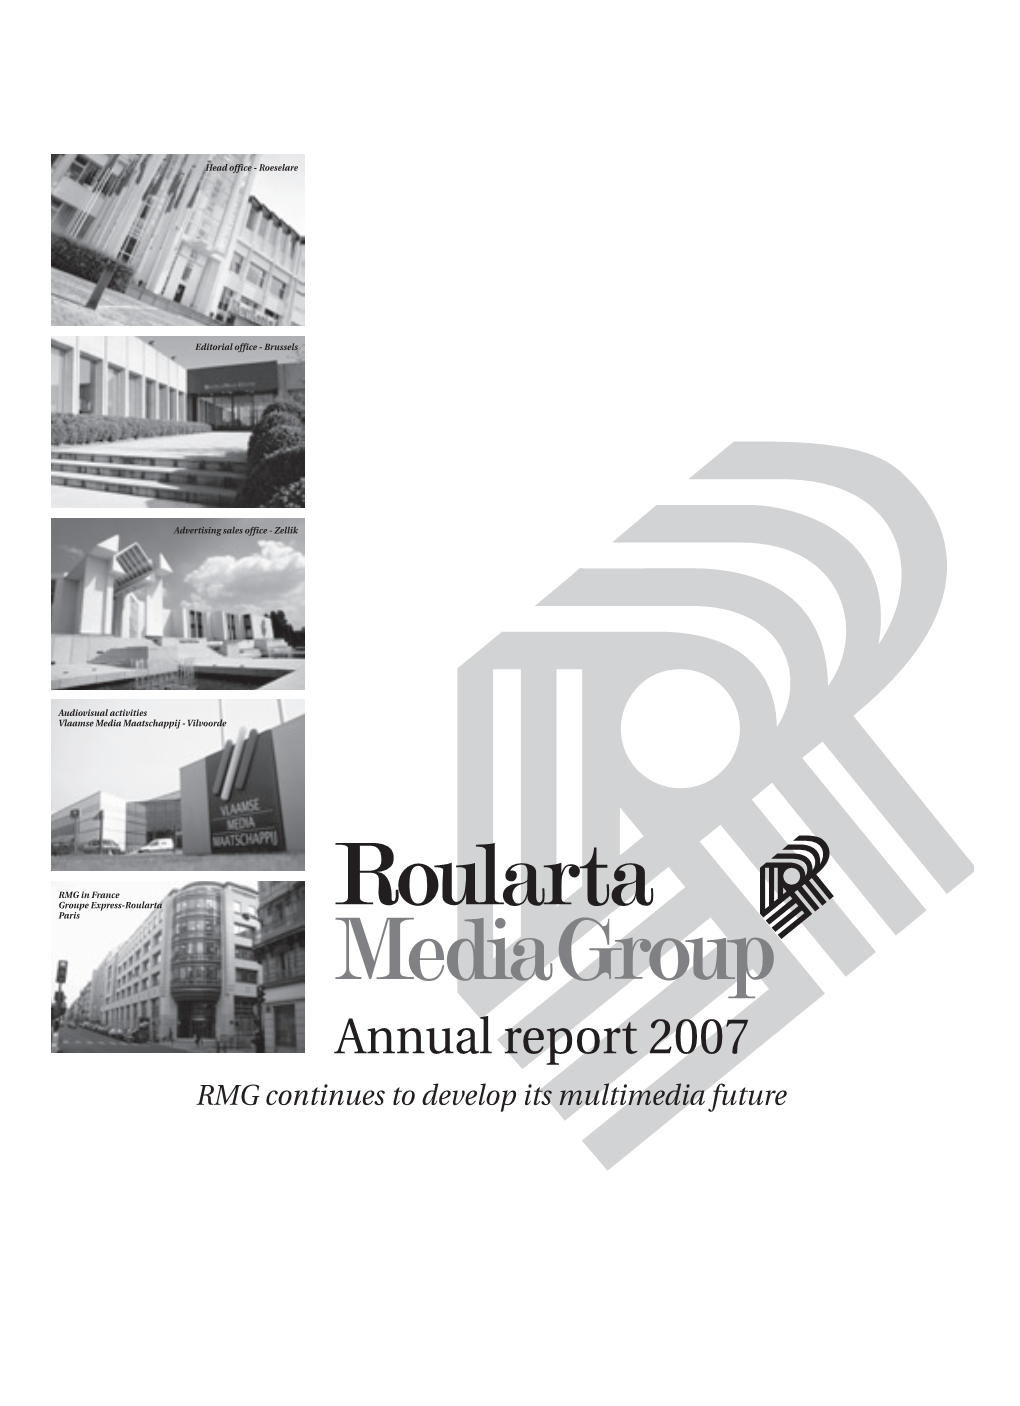 Annual Report 2007 RMG Continues to Develop Its Multimedia Future ANNUAL REPORT 07 | ROULARTA MEDIA GROUP CONTENTS